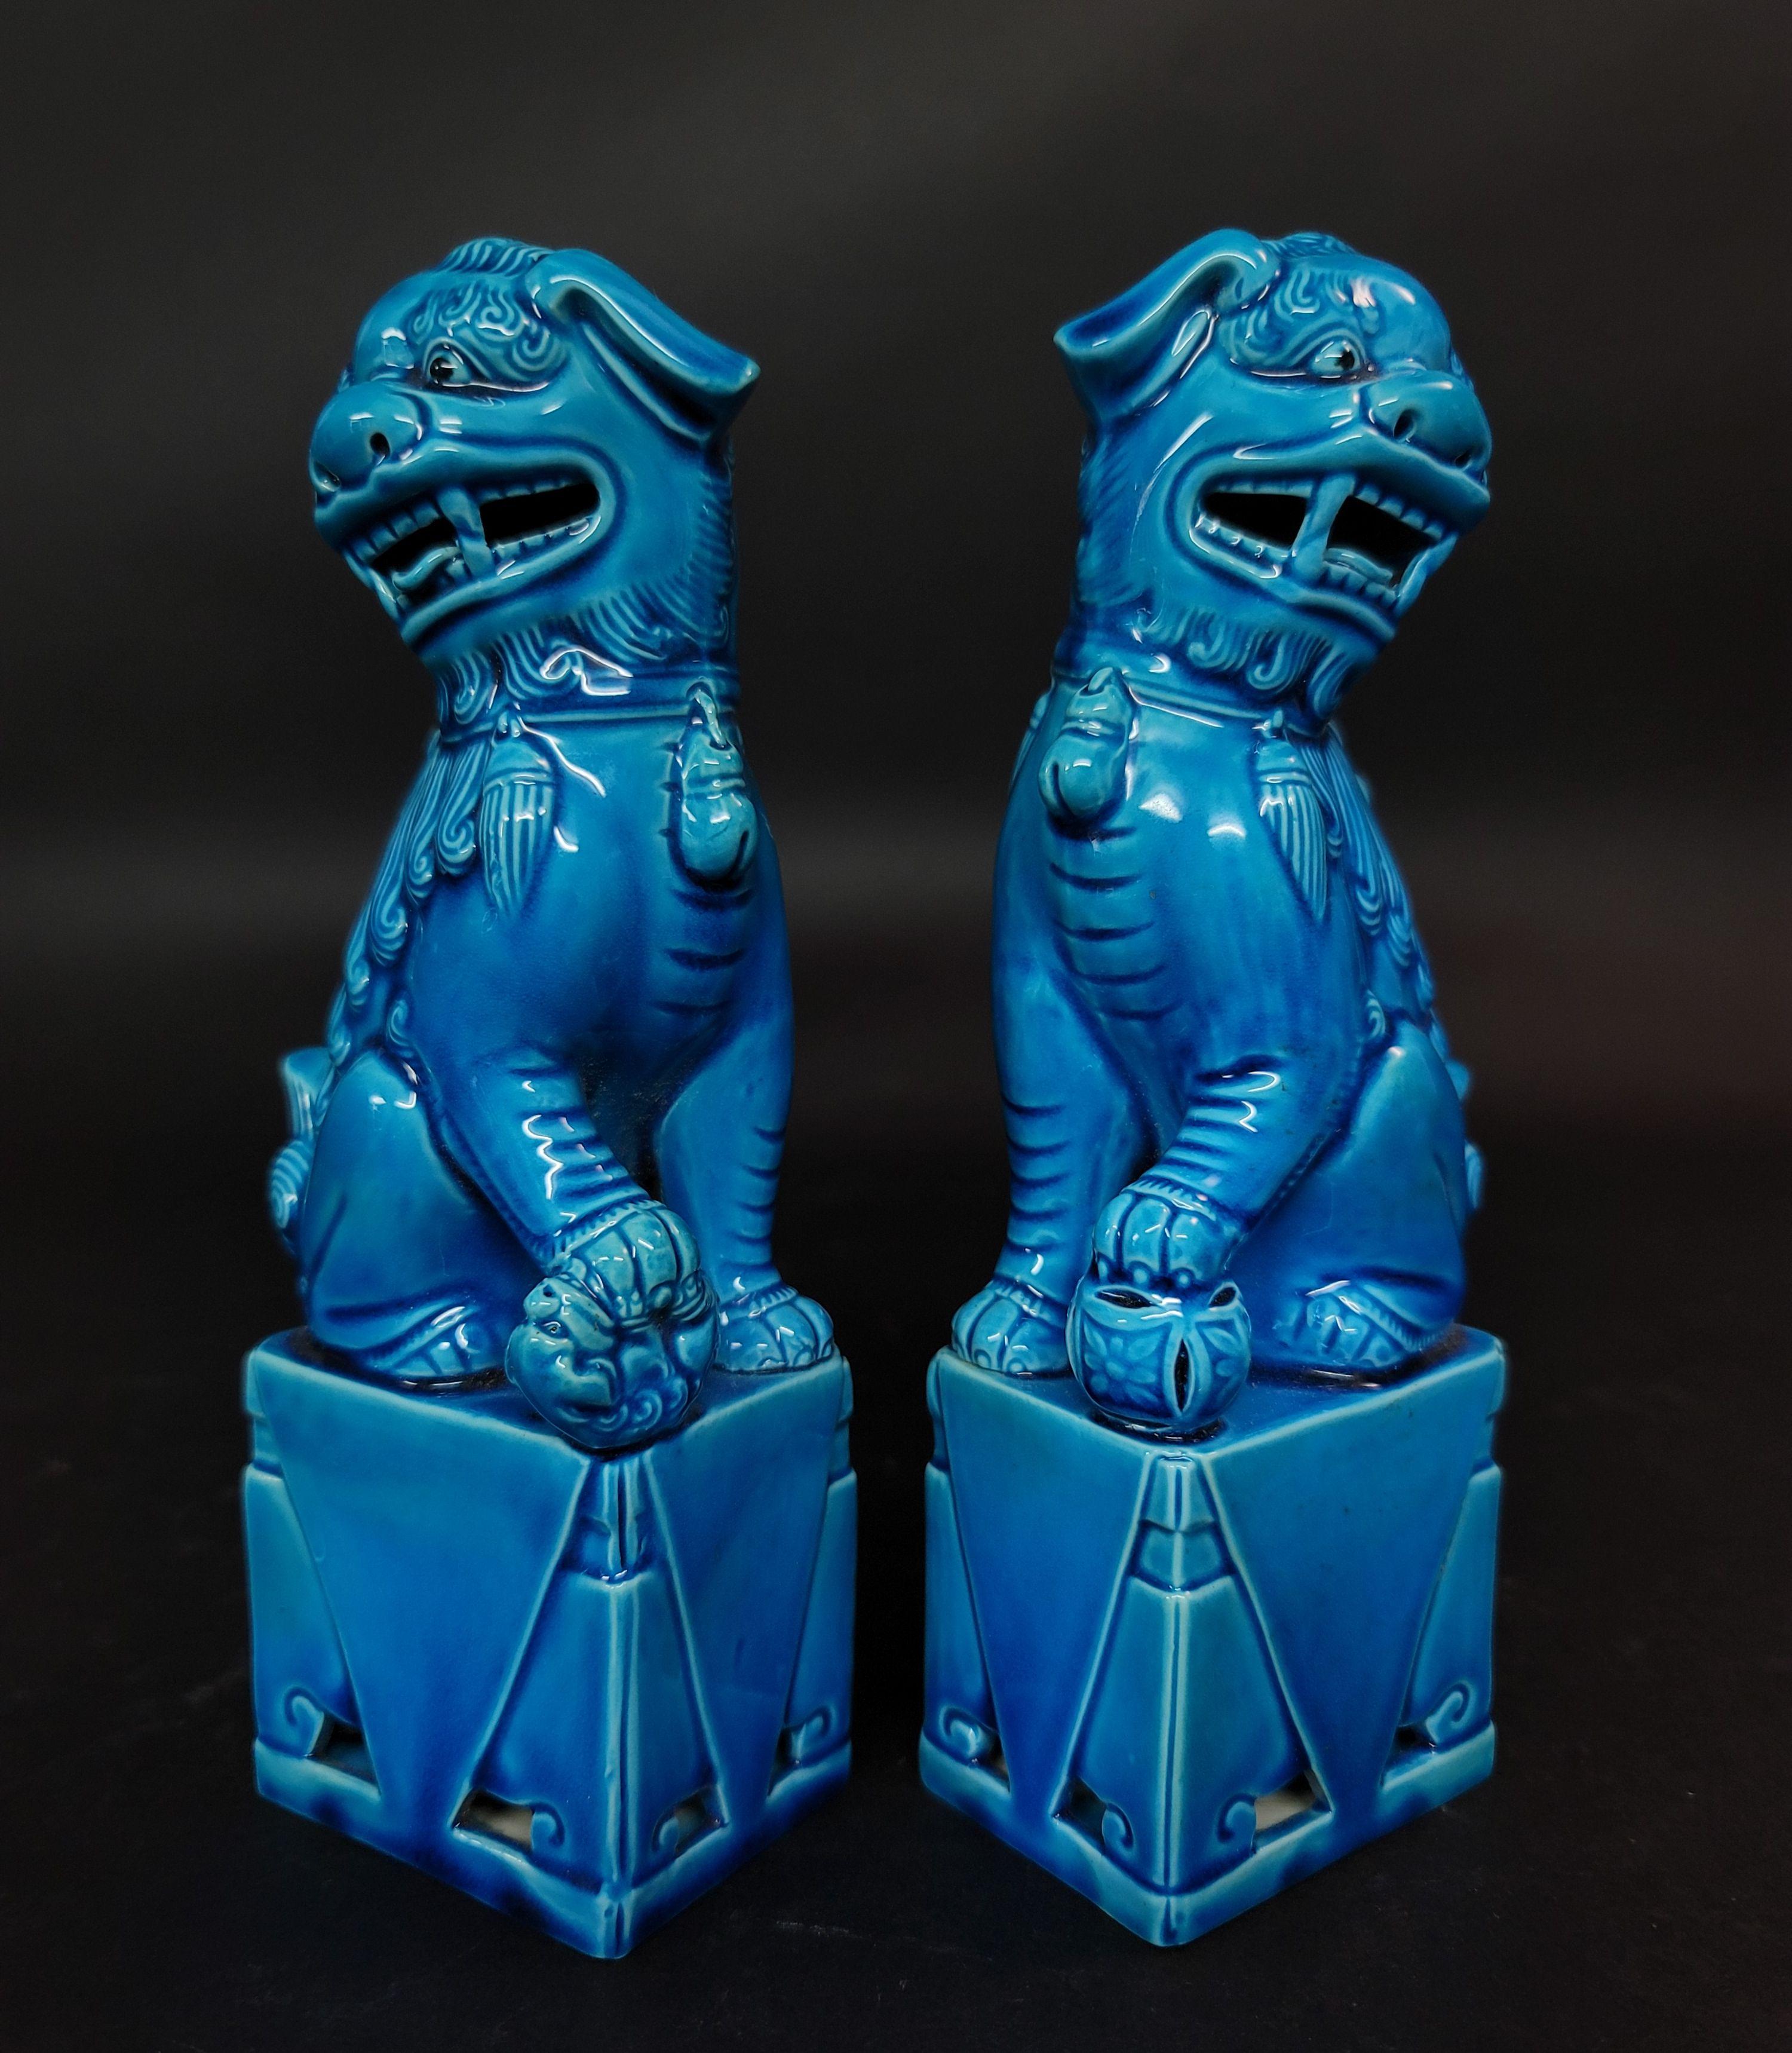 Fine and very detailed pair of Chinese turquoise glazed foo dogs from the mid 20th century. The hollow biscuit porcelain figures stand raised on a rectangular base and are looking sideways with open mouths and tongues showing teeth each with a